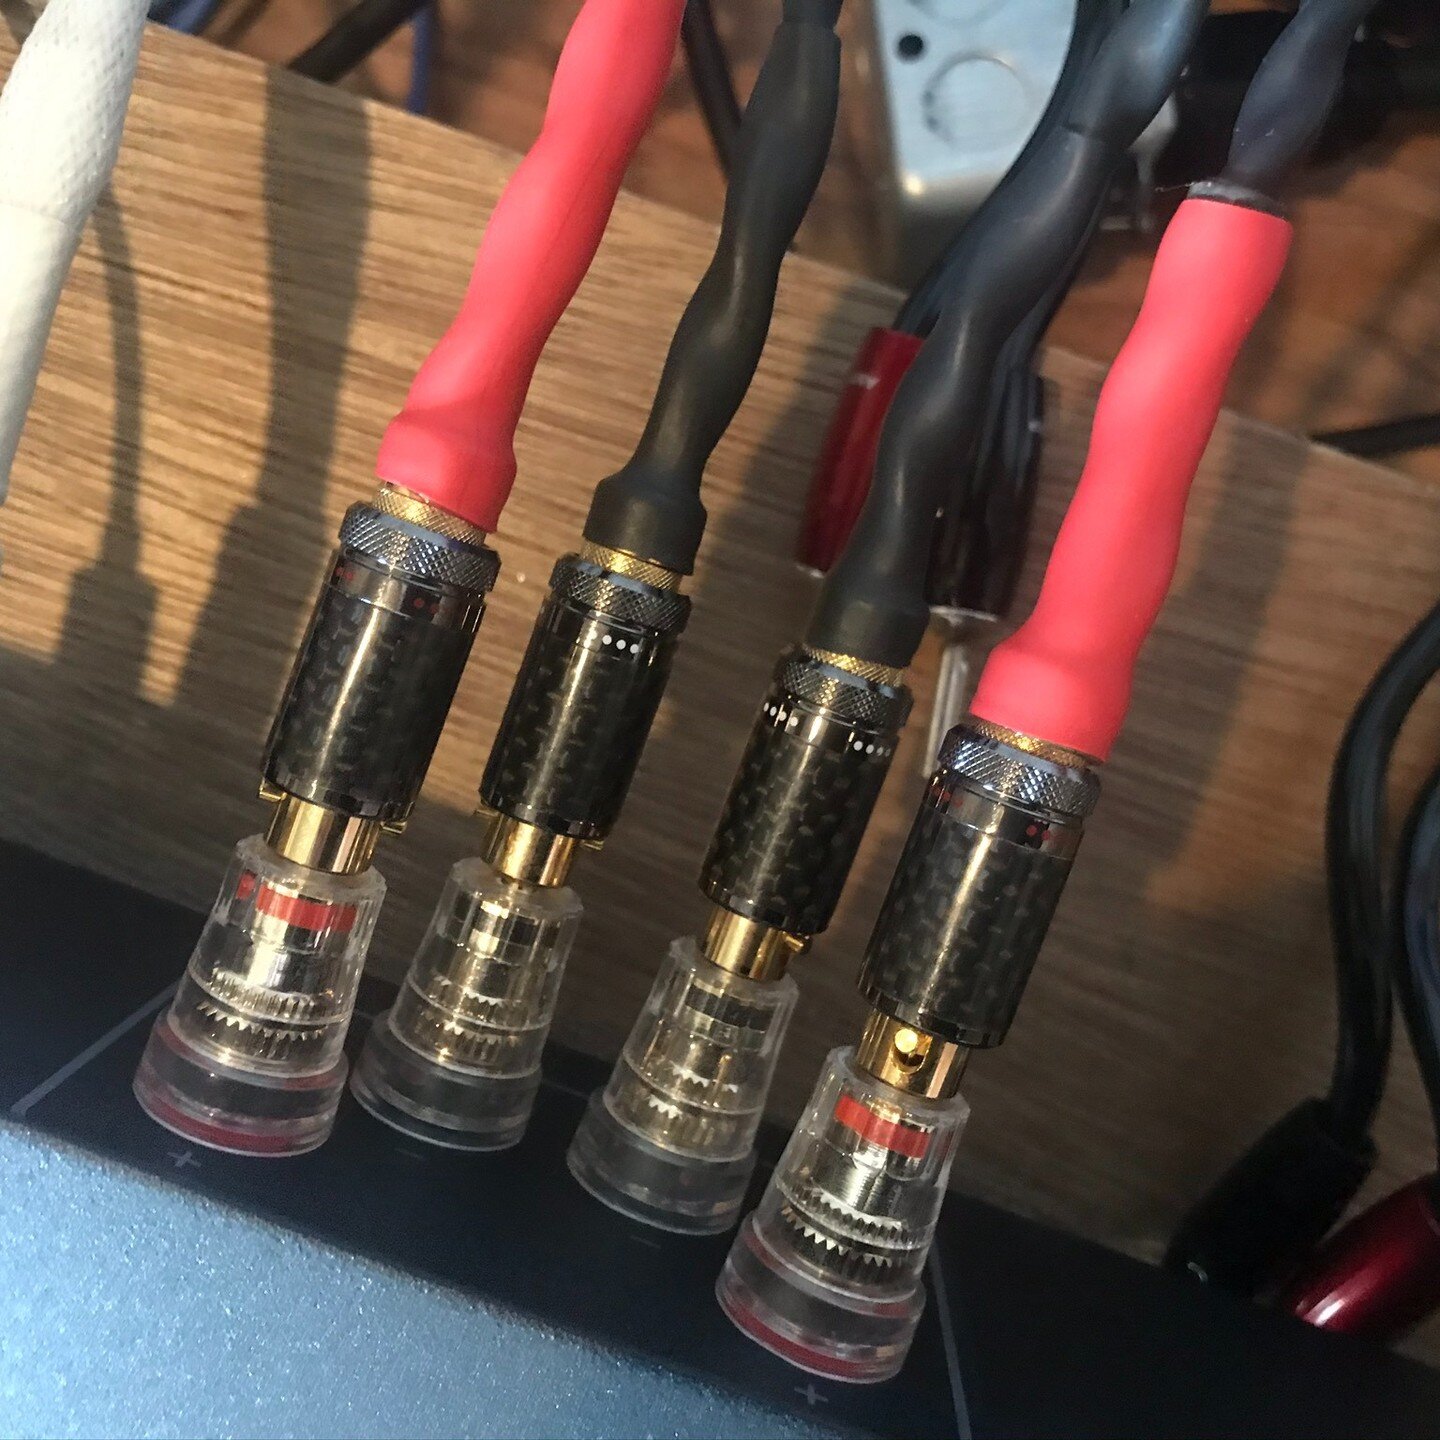 Vintage Western Electric KS13385 tinned-copper speaker cables on my Legacy Tannoy Arden loudspeakers. 

There is a TON of info on tinned copper on the web. Tinned-Copper is great for very dynamic loudspeakers such as Avantgarde Acoustic, I wouldn't r